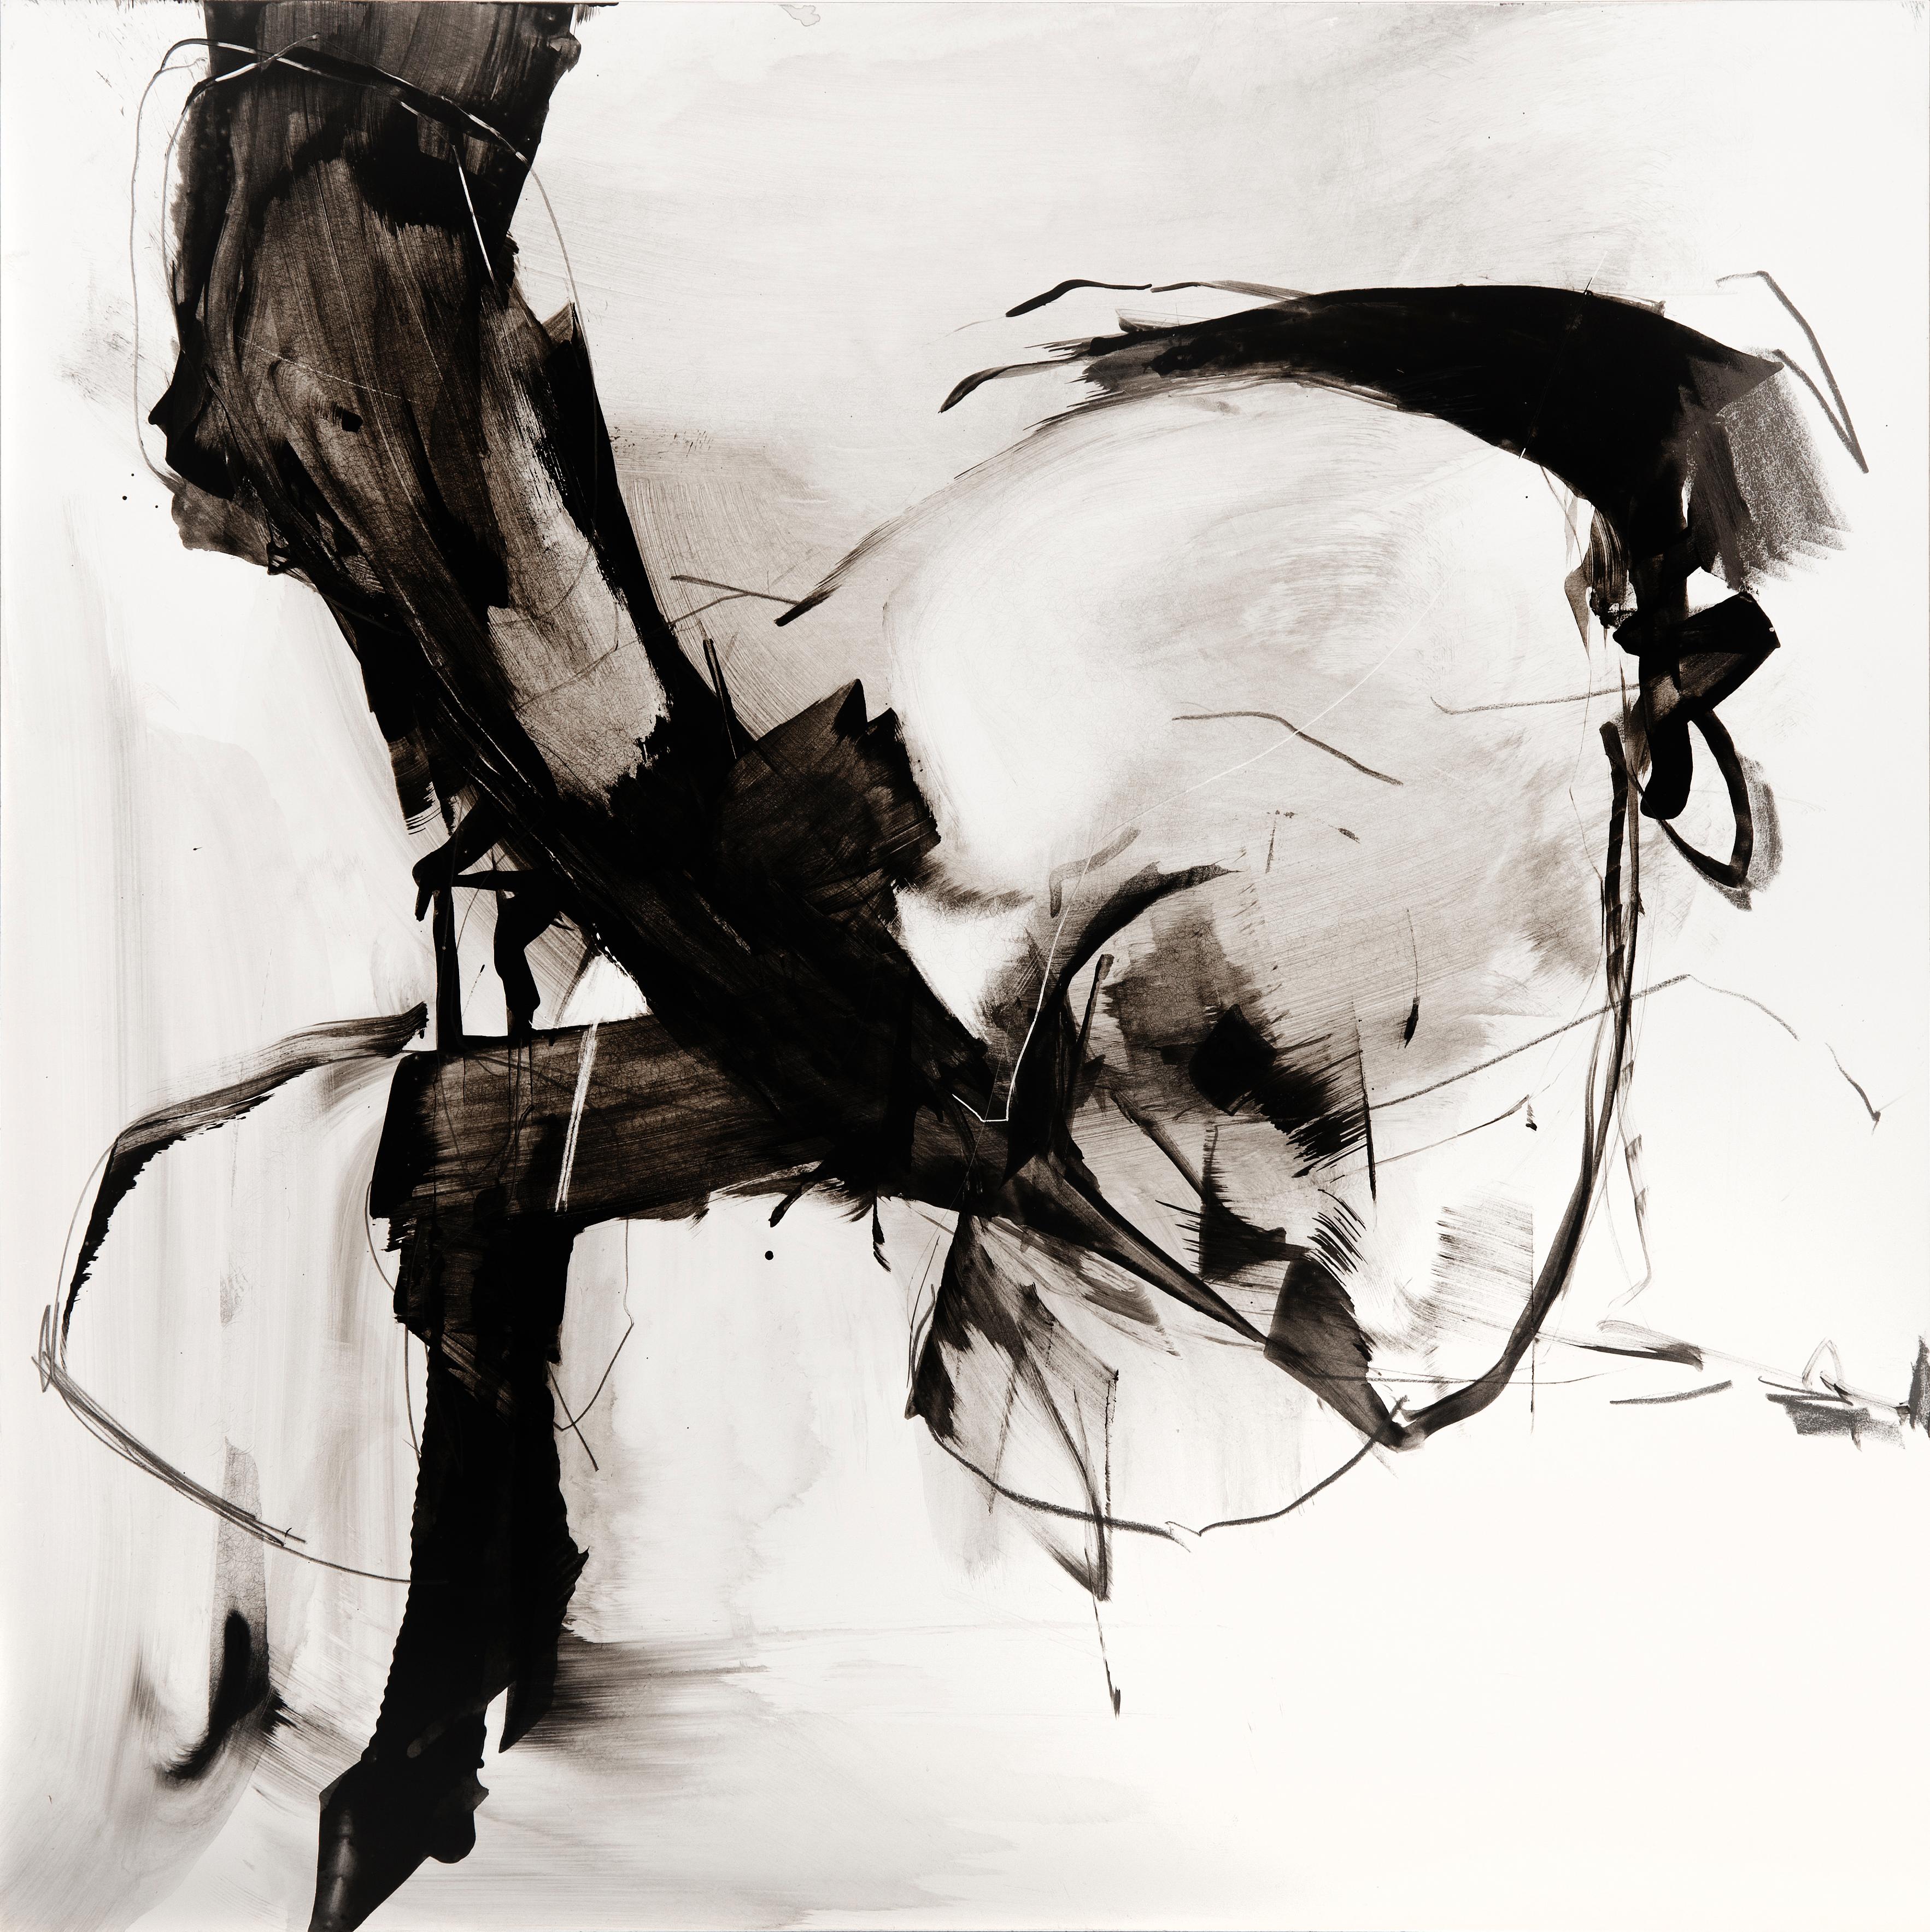 Melody - abstract calligraphy ink drawing / painting on clayboard, black & white